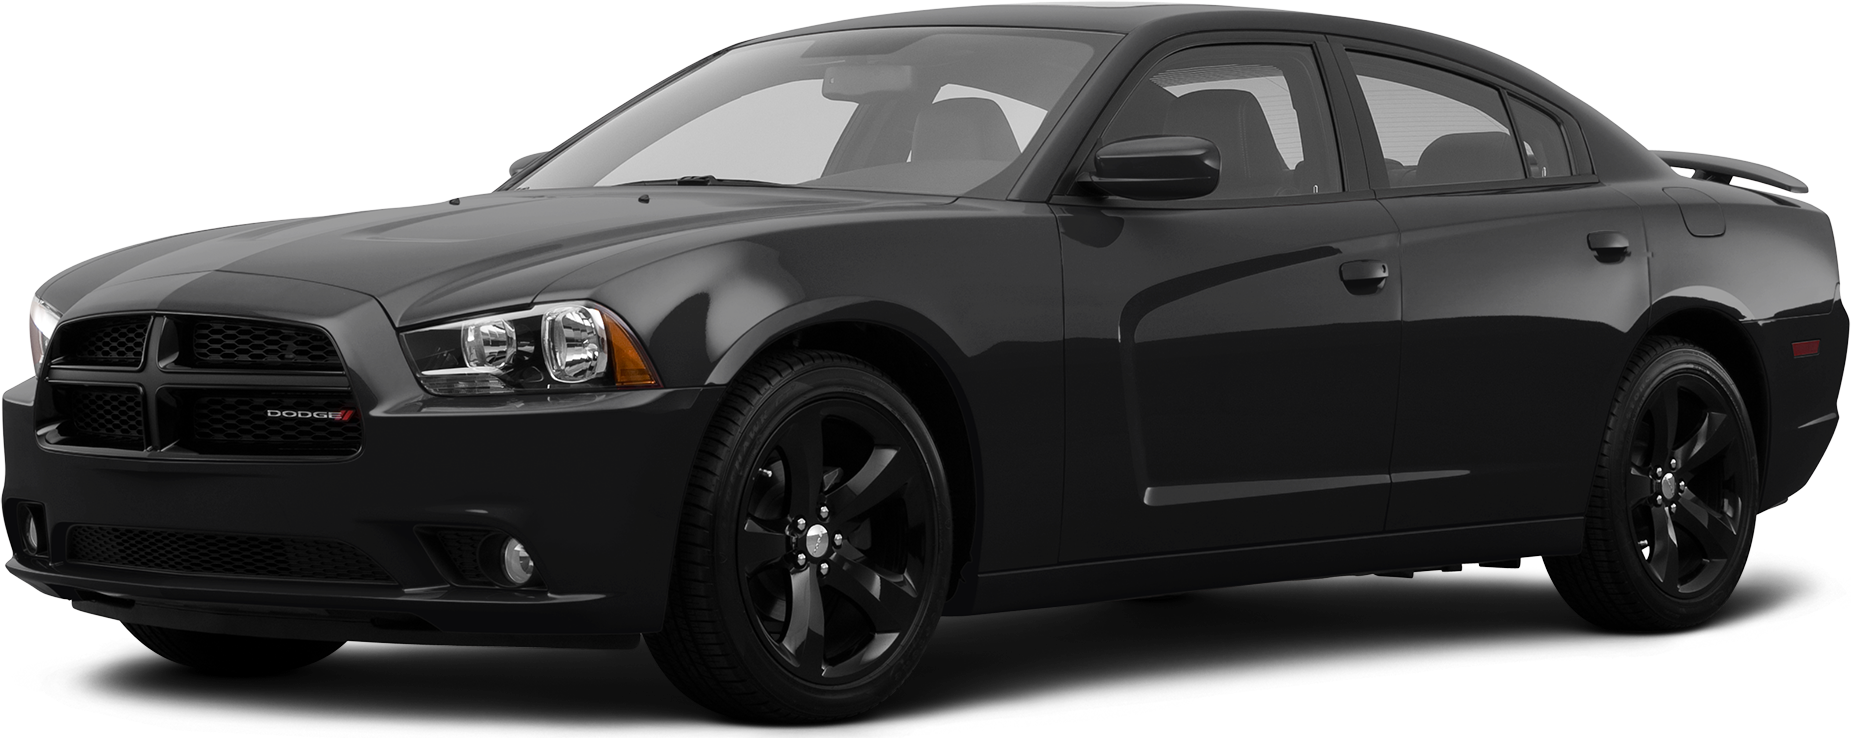 2013 Dodge Charger Values & Cars for Sale | Kelley Blue Book